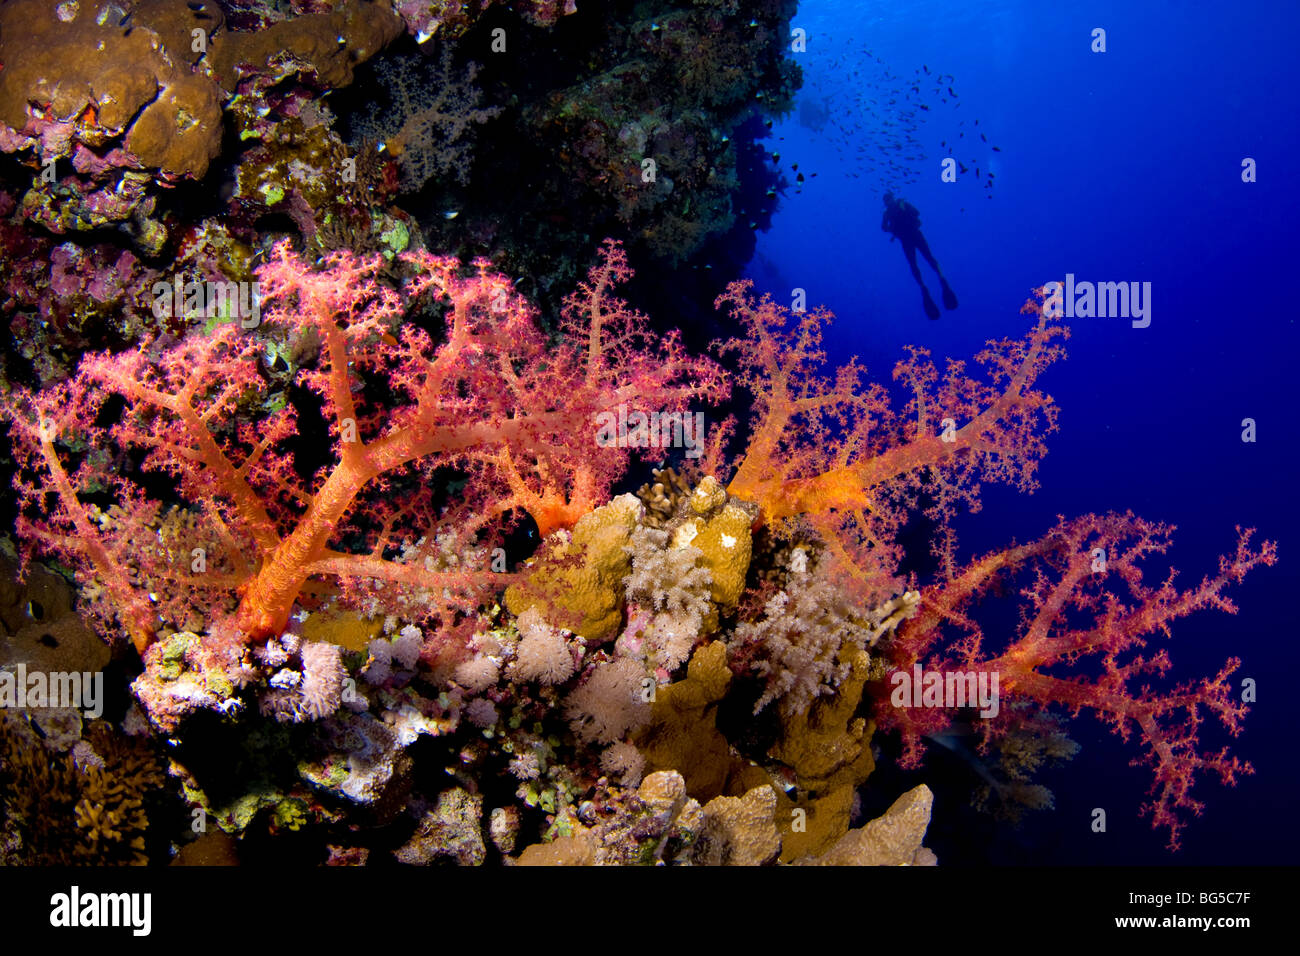 Red Sea coral reefs, underwater, soft coral, tropical reef, blue water, deep, visibility, diver, silhouette, colorful, ocean, Stock Photo